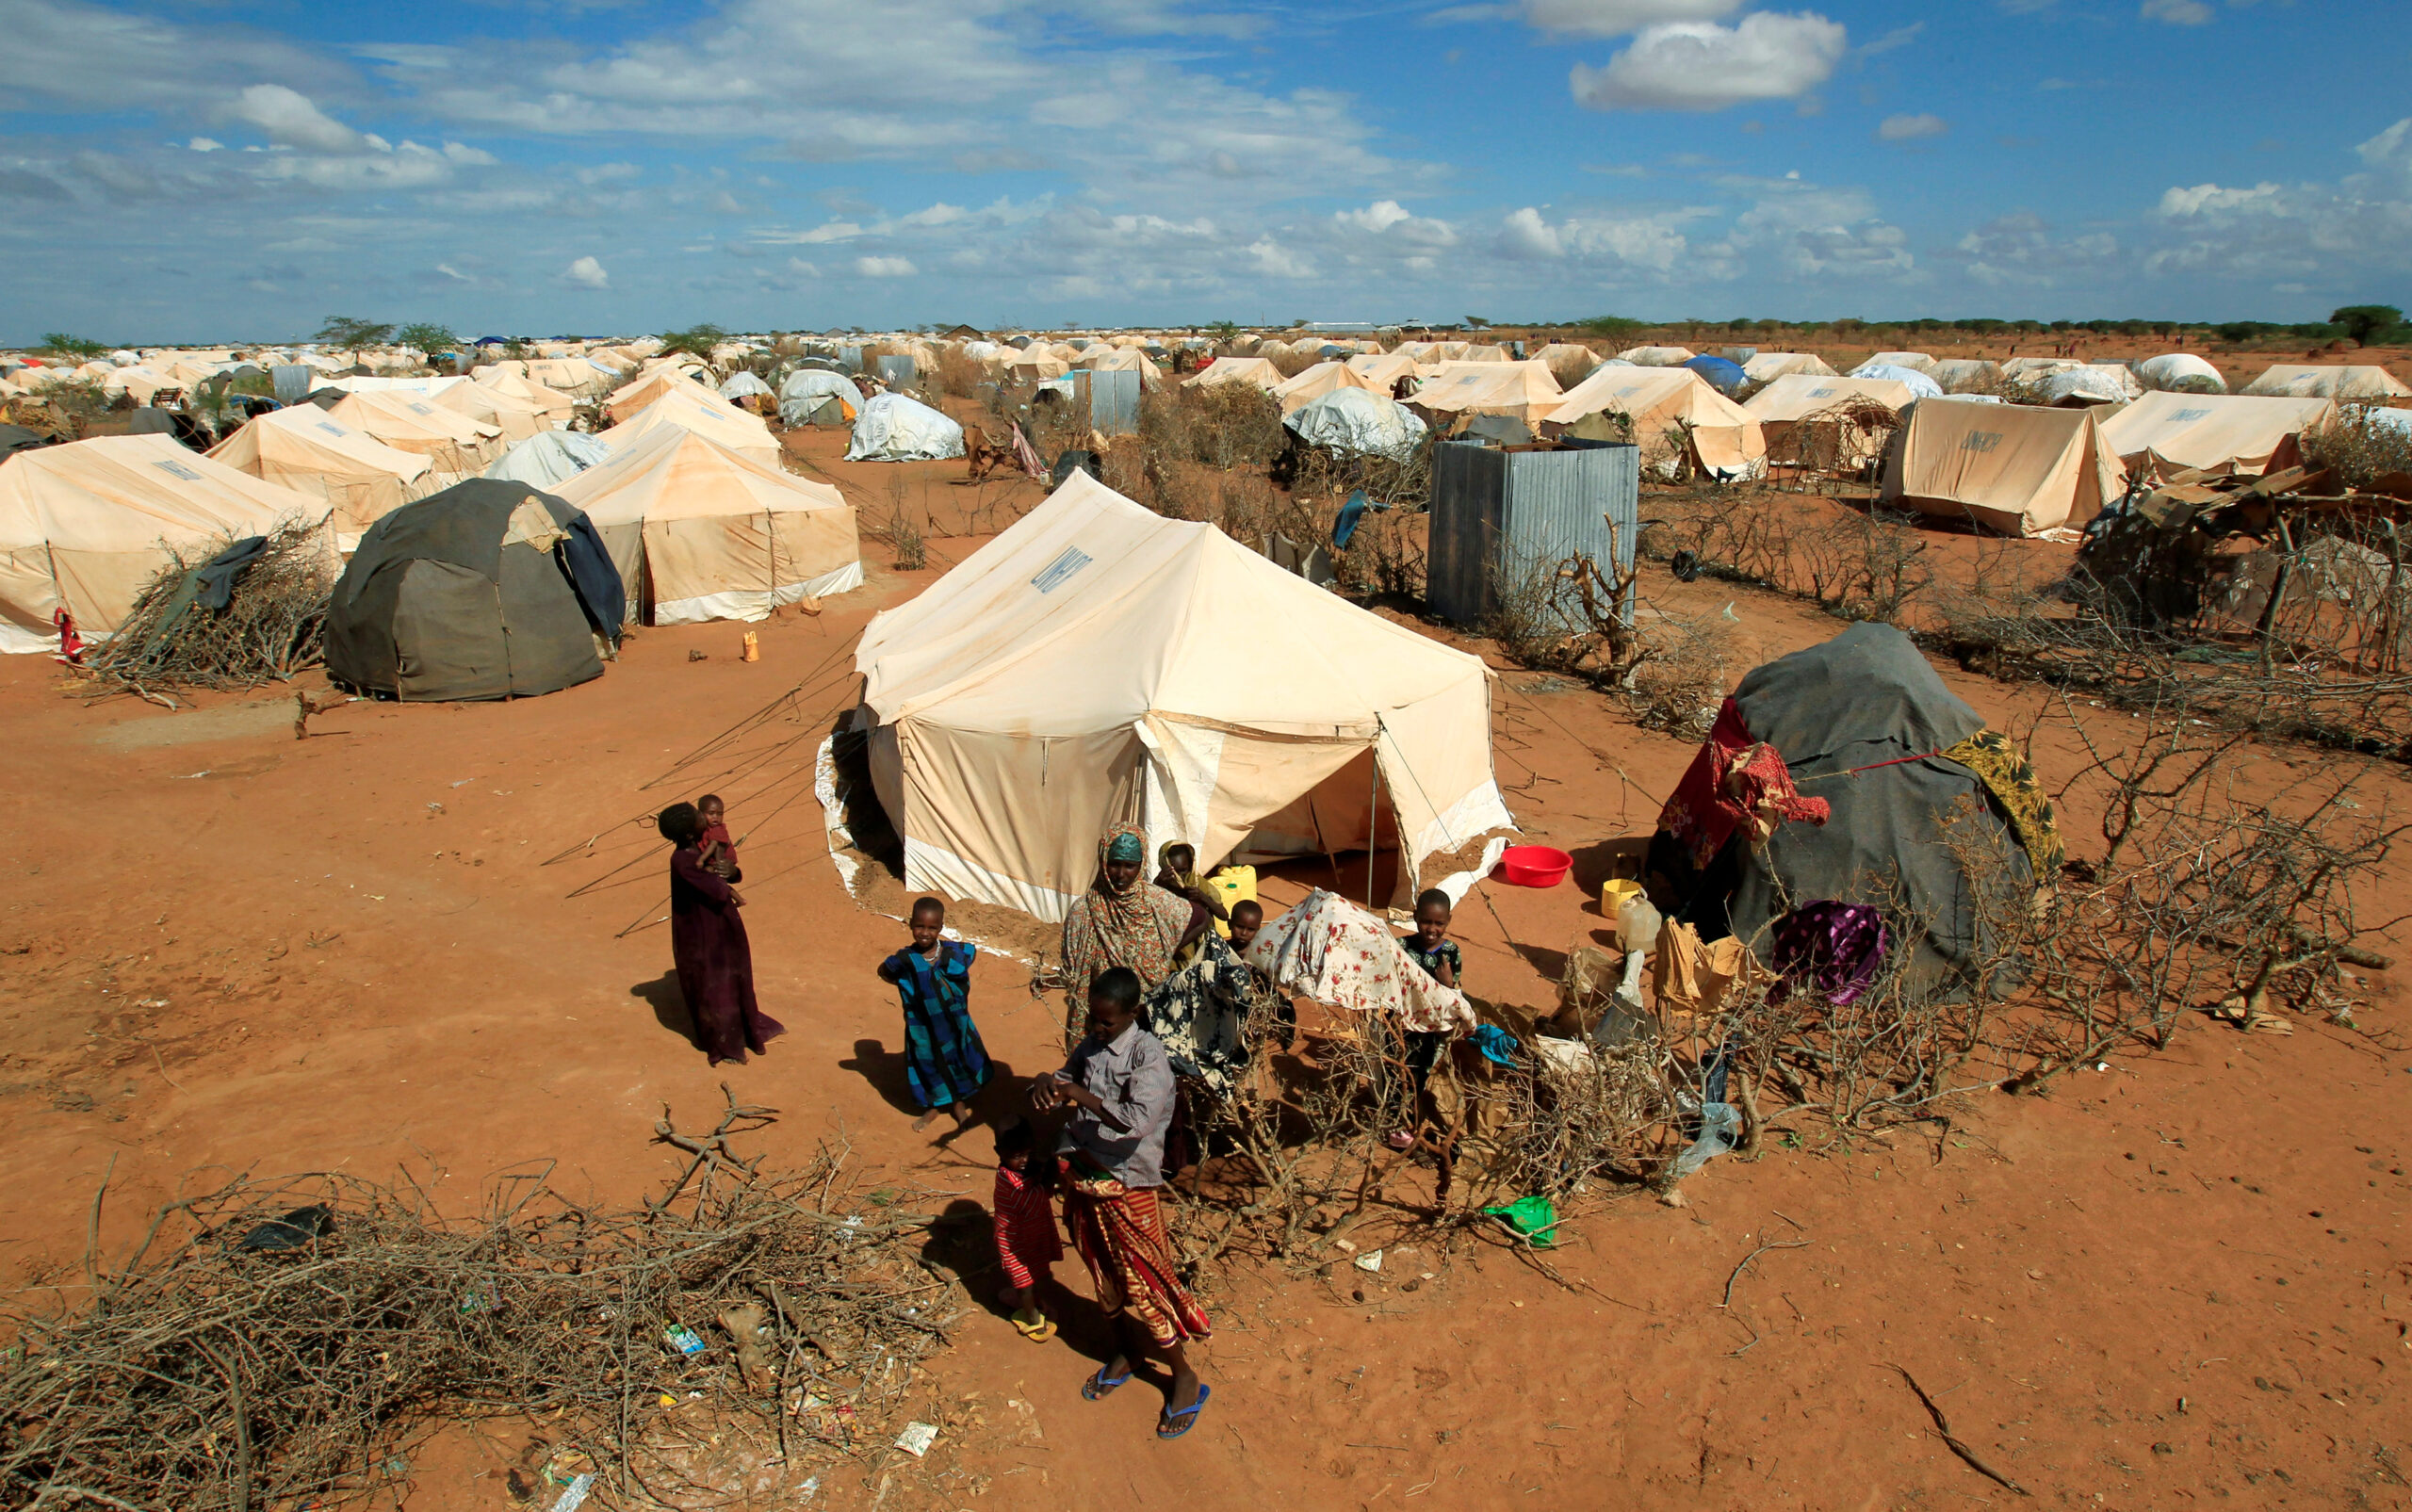 Lack Of IDs Preventing Refugees From Owning Businesses In Kenya - Refugee Services Commissioner